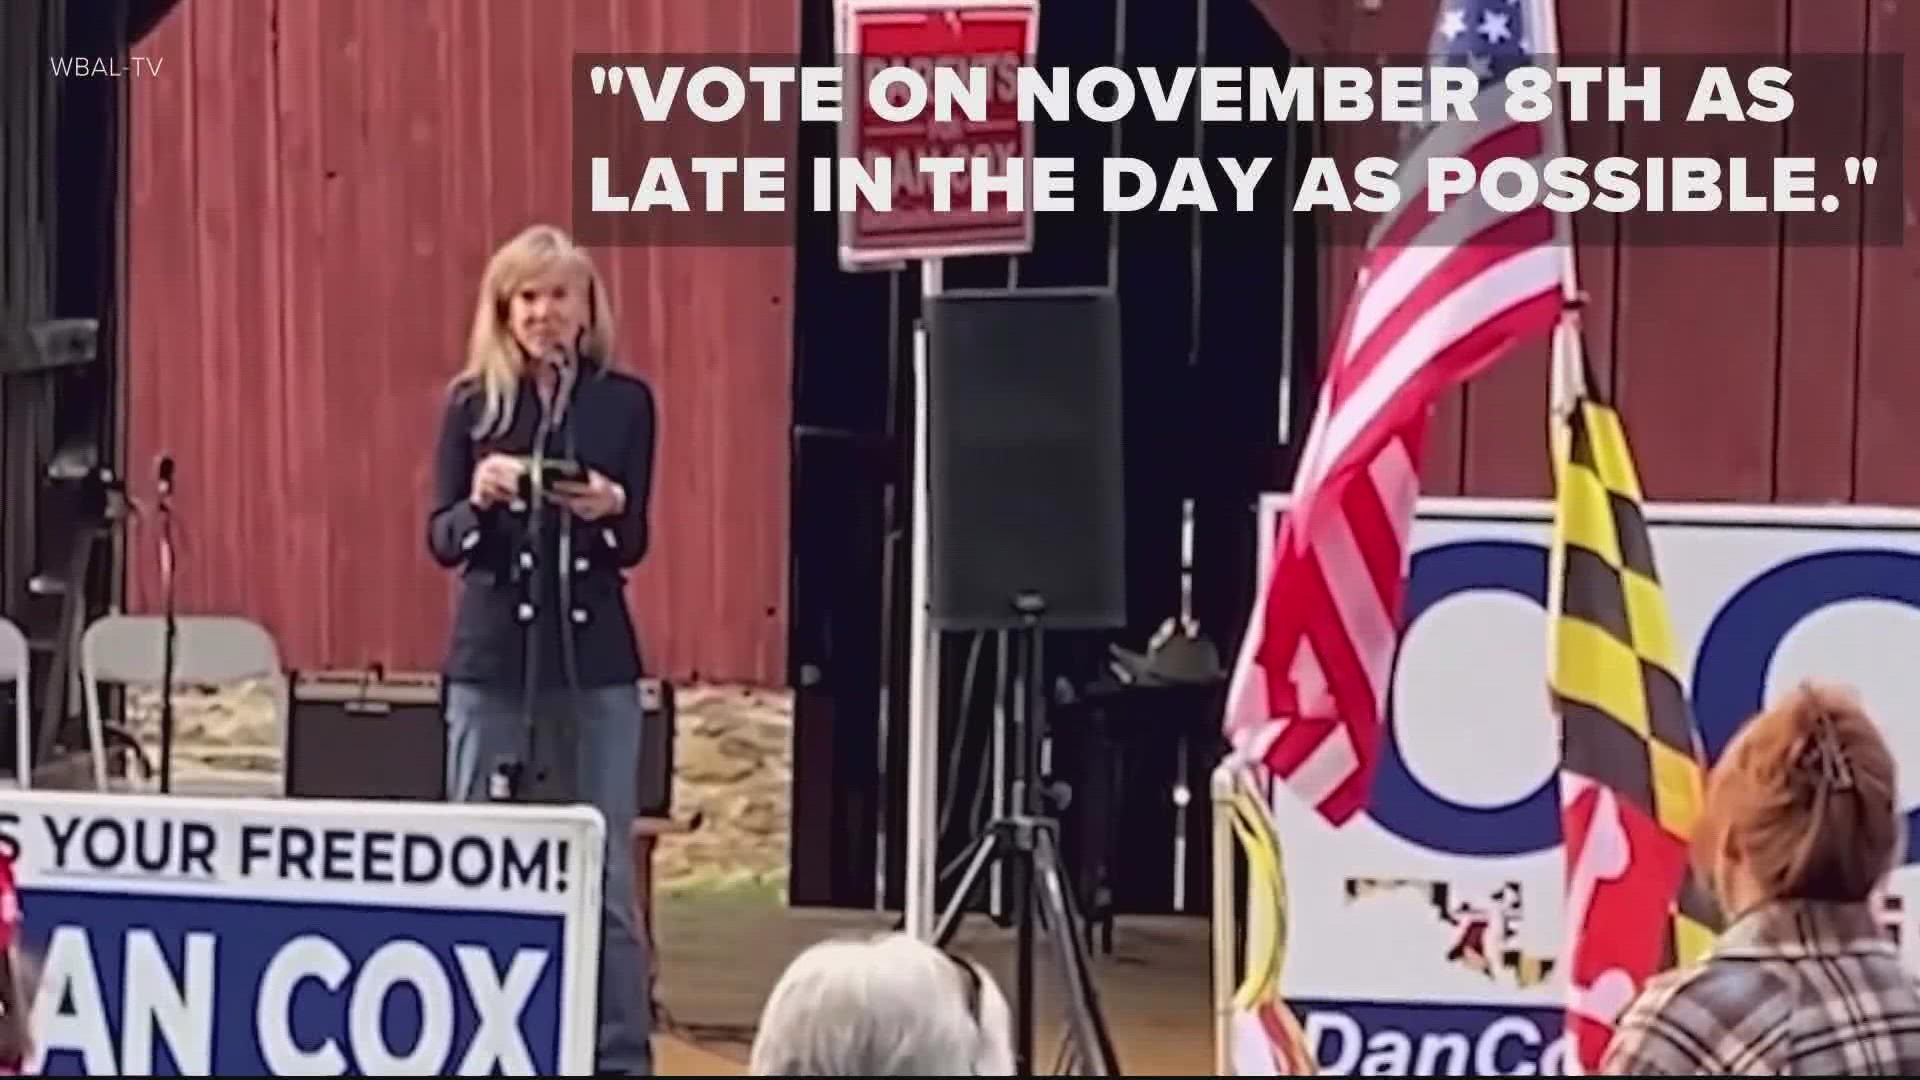 The “vote late” conspiracy became an issue in Maryland after the manager for Republican Attorney General candidate Michael Peroutka rallied supporters to vote late.